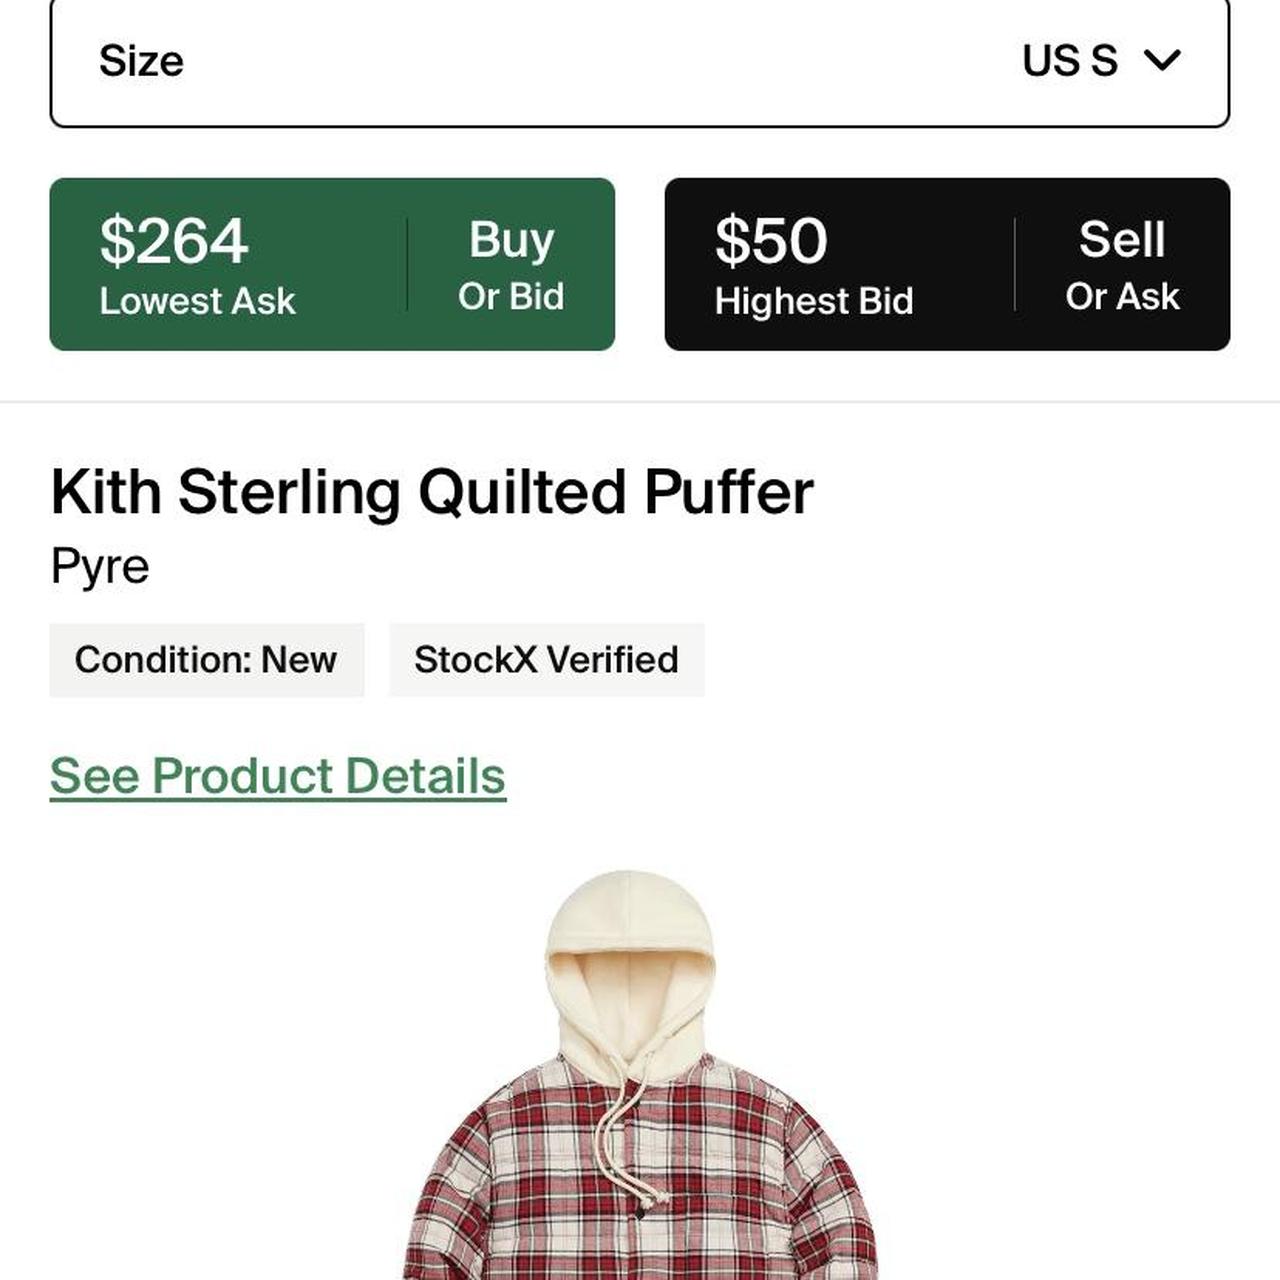 Kith Sterling Quilted Puffer, Lightly Worn, very...